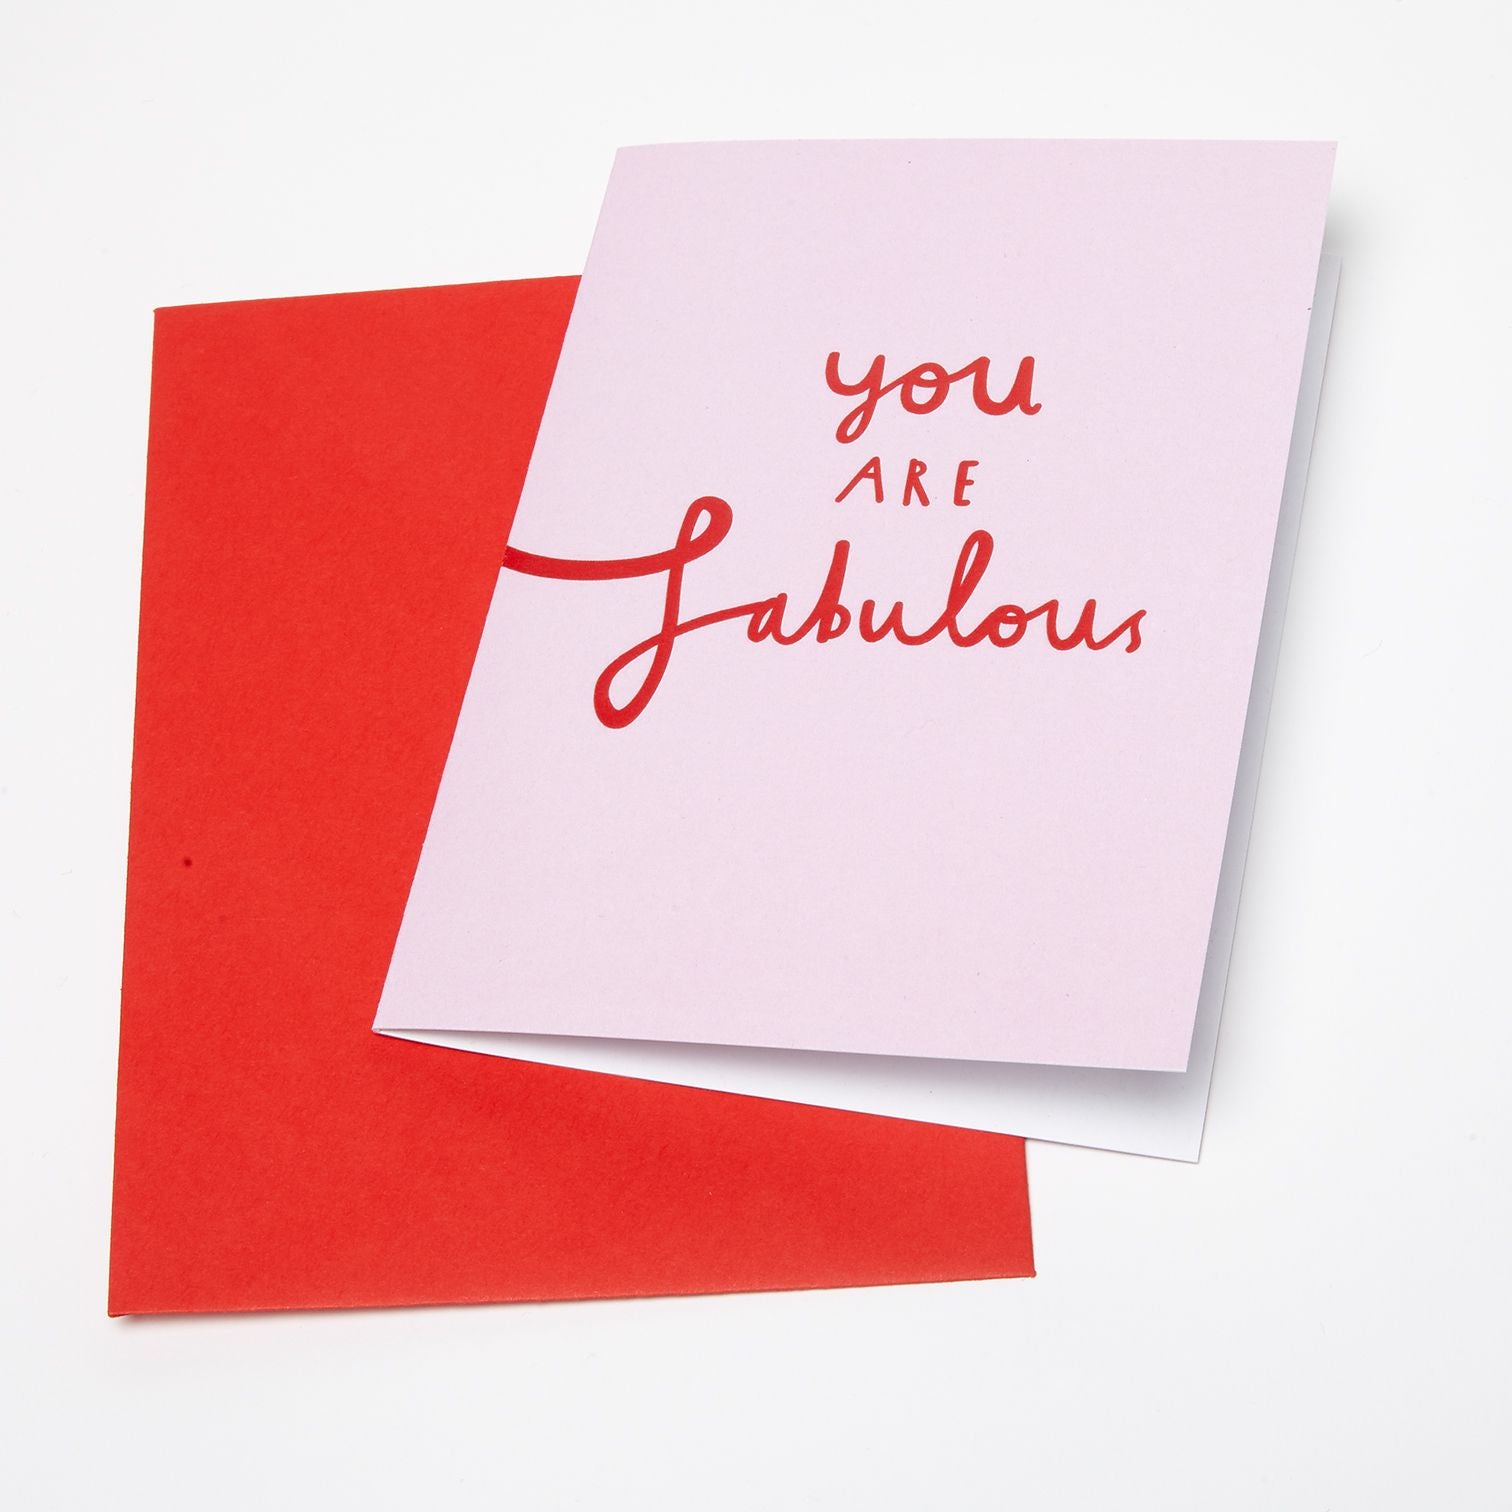 You are Fabulous - A6 Greetings card - Planet-friendly materials